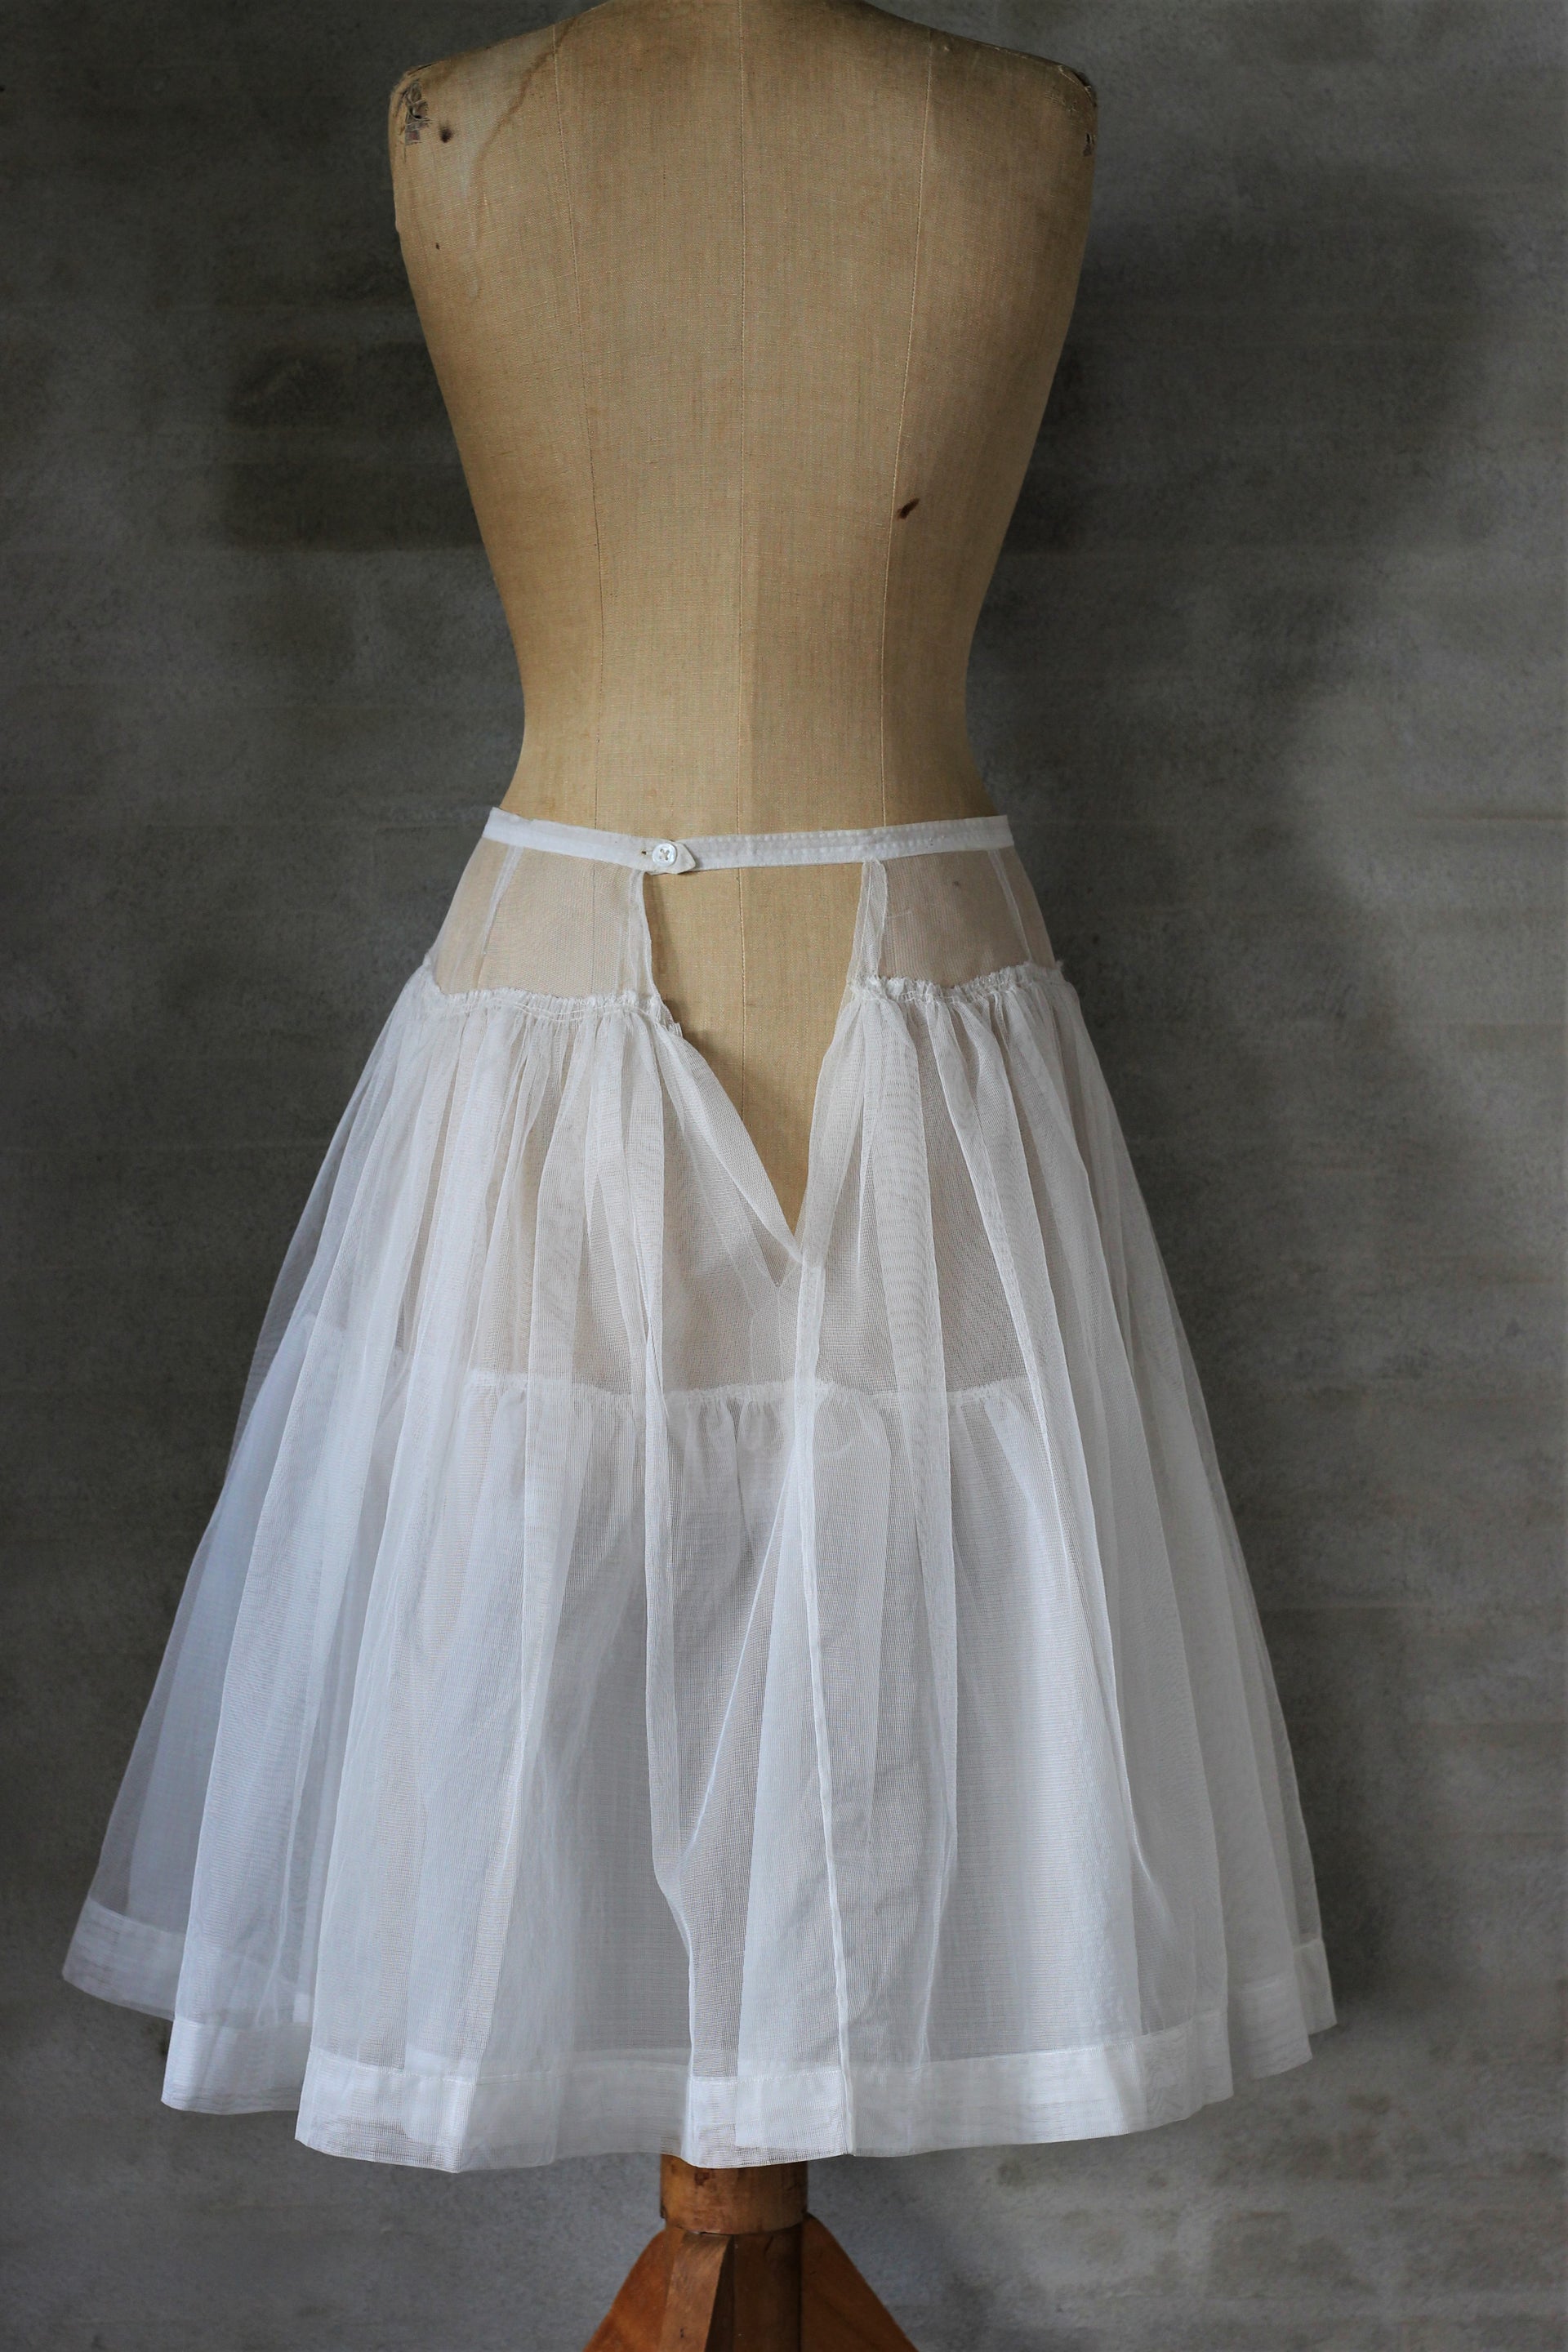 1950s Tulle Skirt in Two Layers/Size S       S2